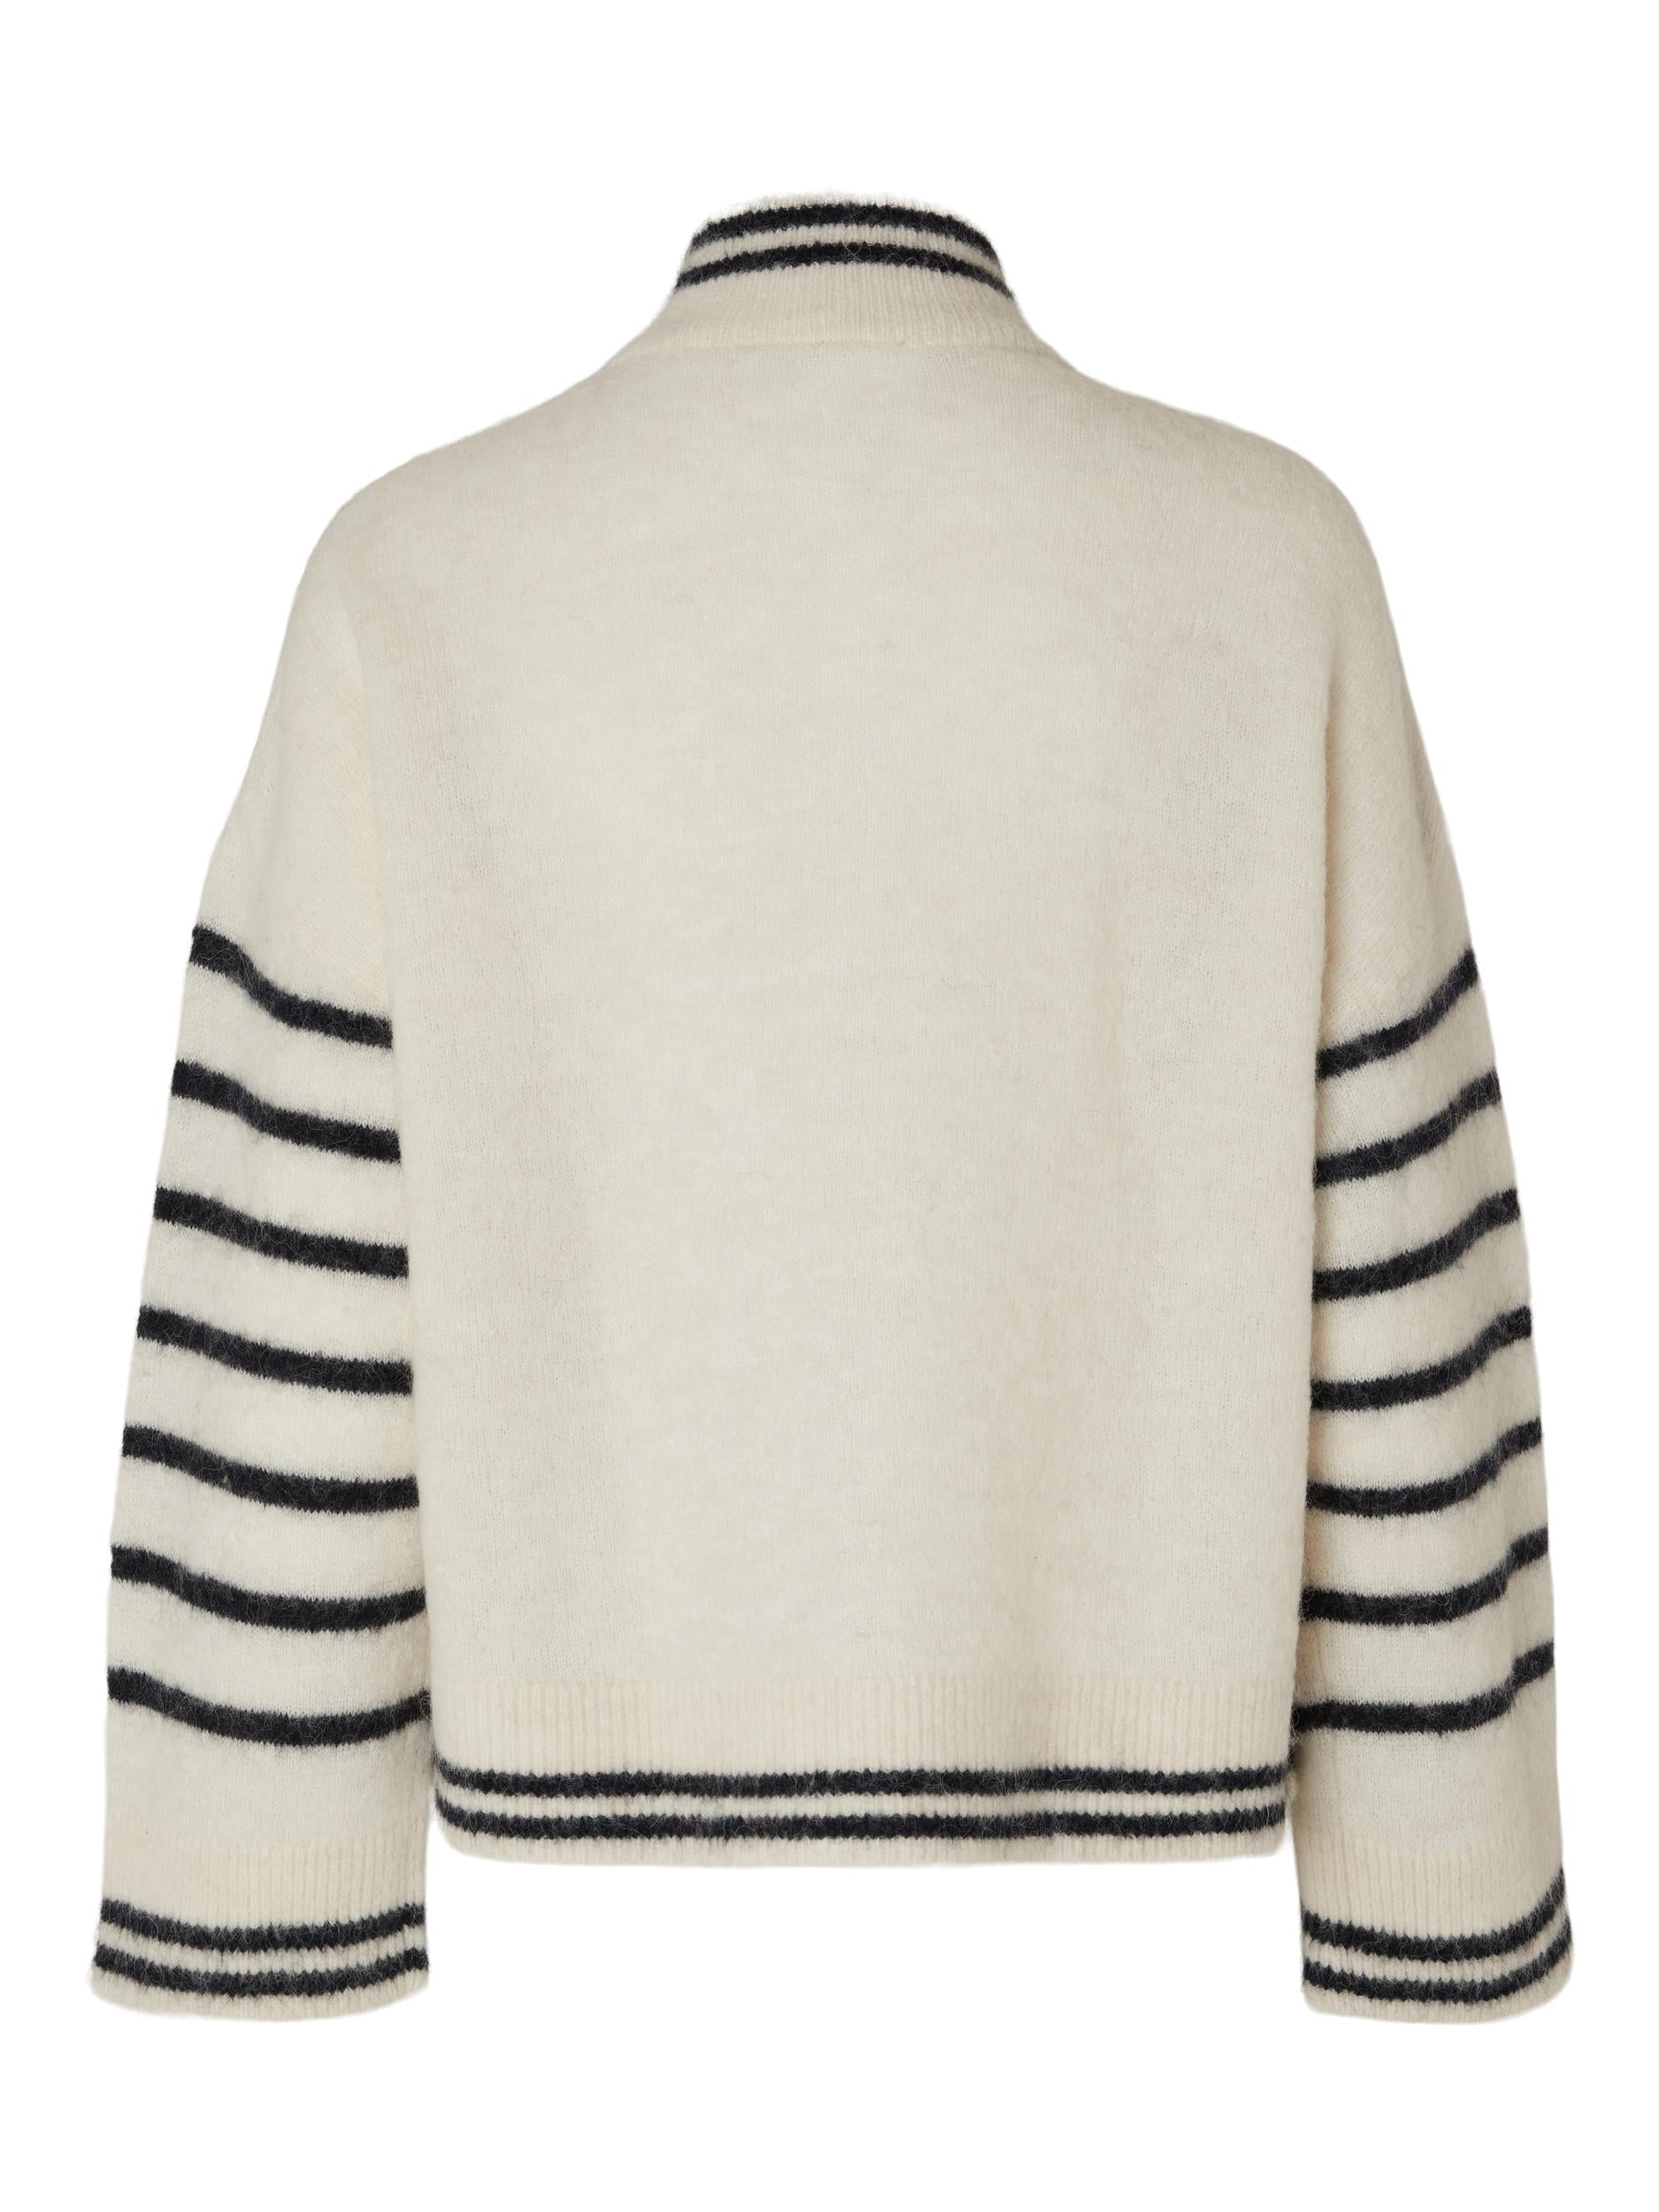 Selected Femme "Sia" Knit Cardigan birch/navy